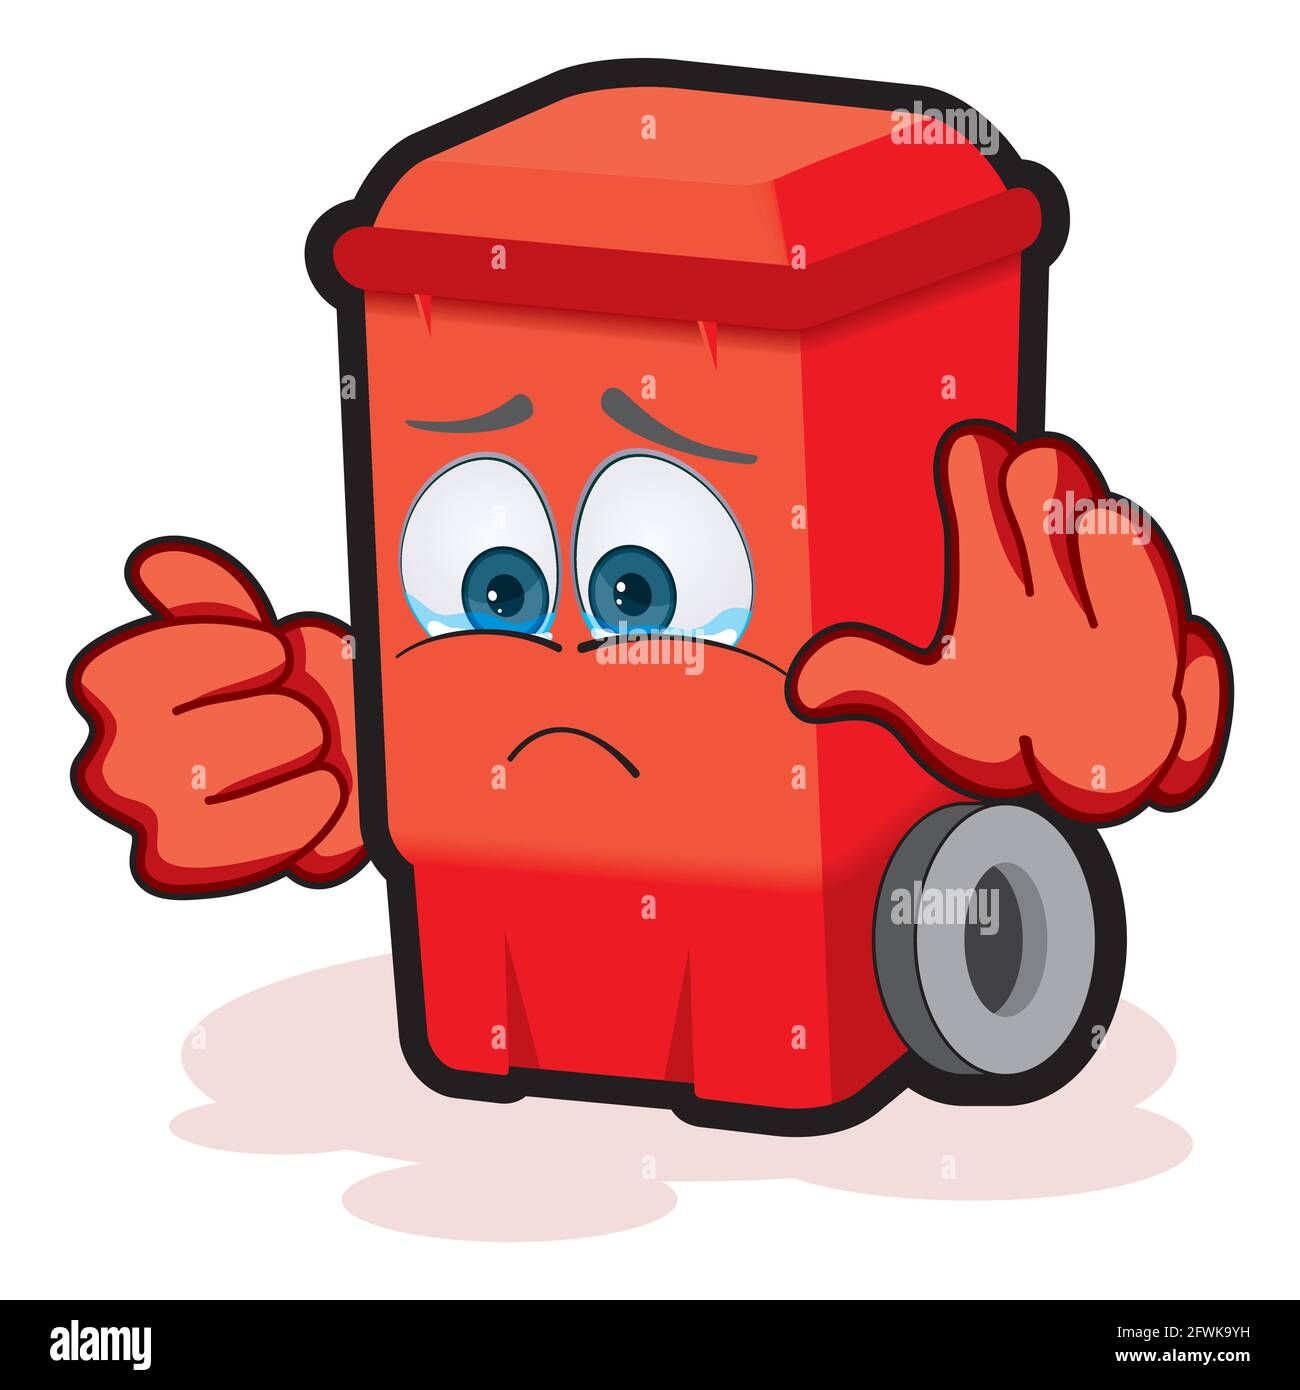 https://c8.alamy.com/comp/2FWK9YH/trash-can-cartoon-character-mascot-illustration-trash-can-reuse-recycling-and-keep-clean-concept-2FWK9YH.jpg